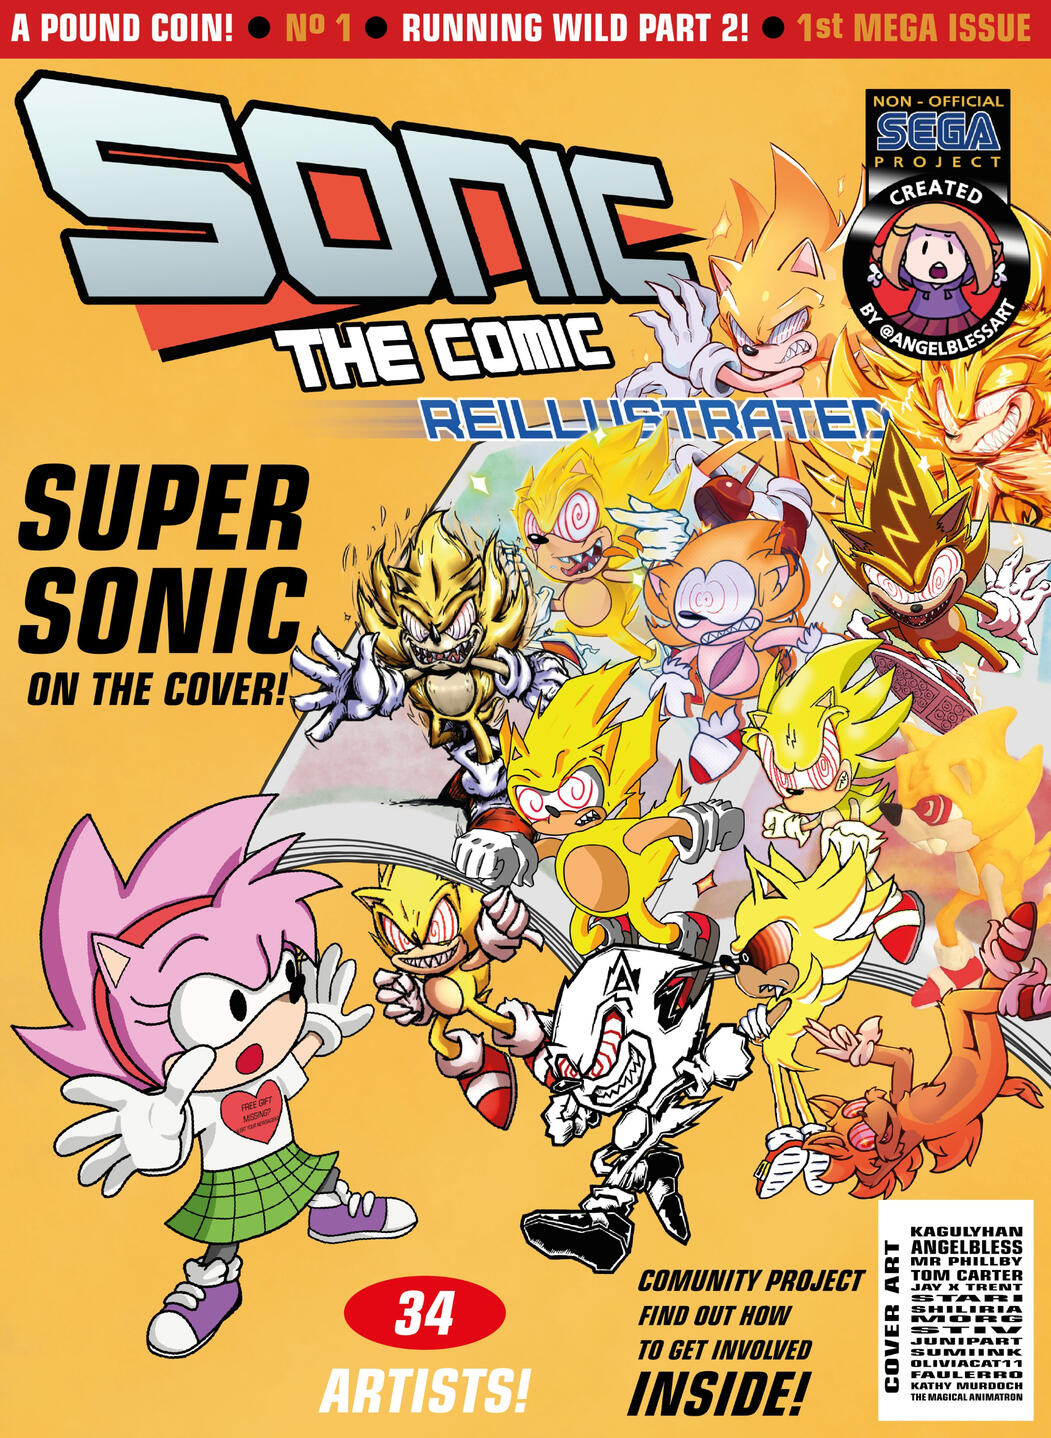 Sonic the Comic: Reillustrated Issue 1